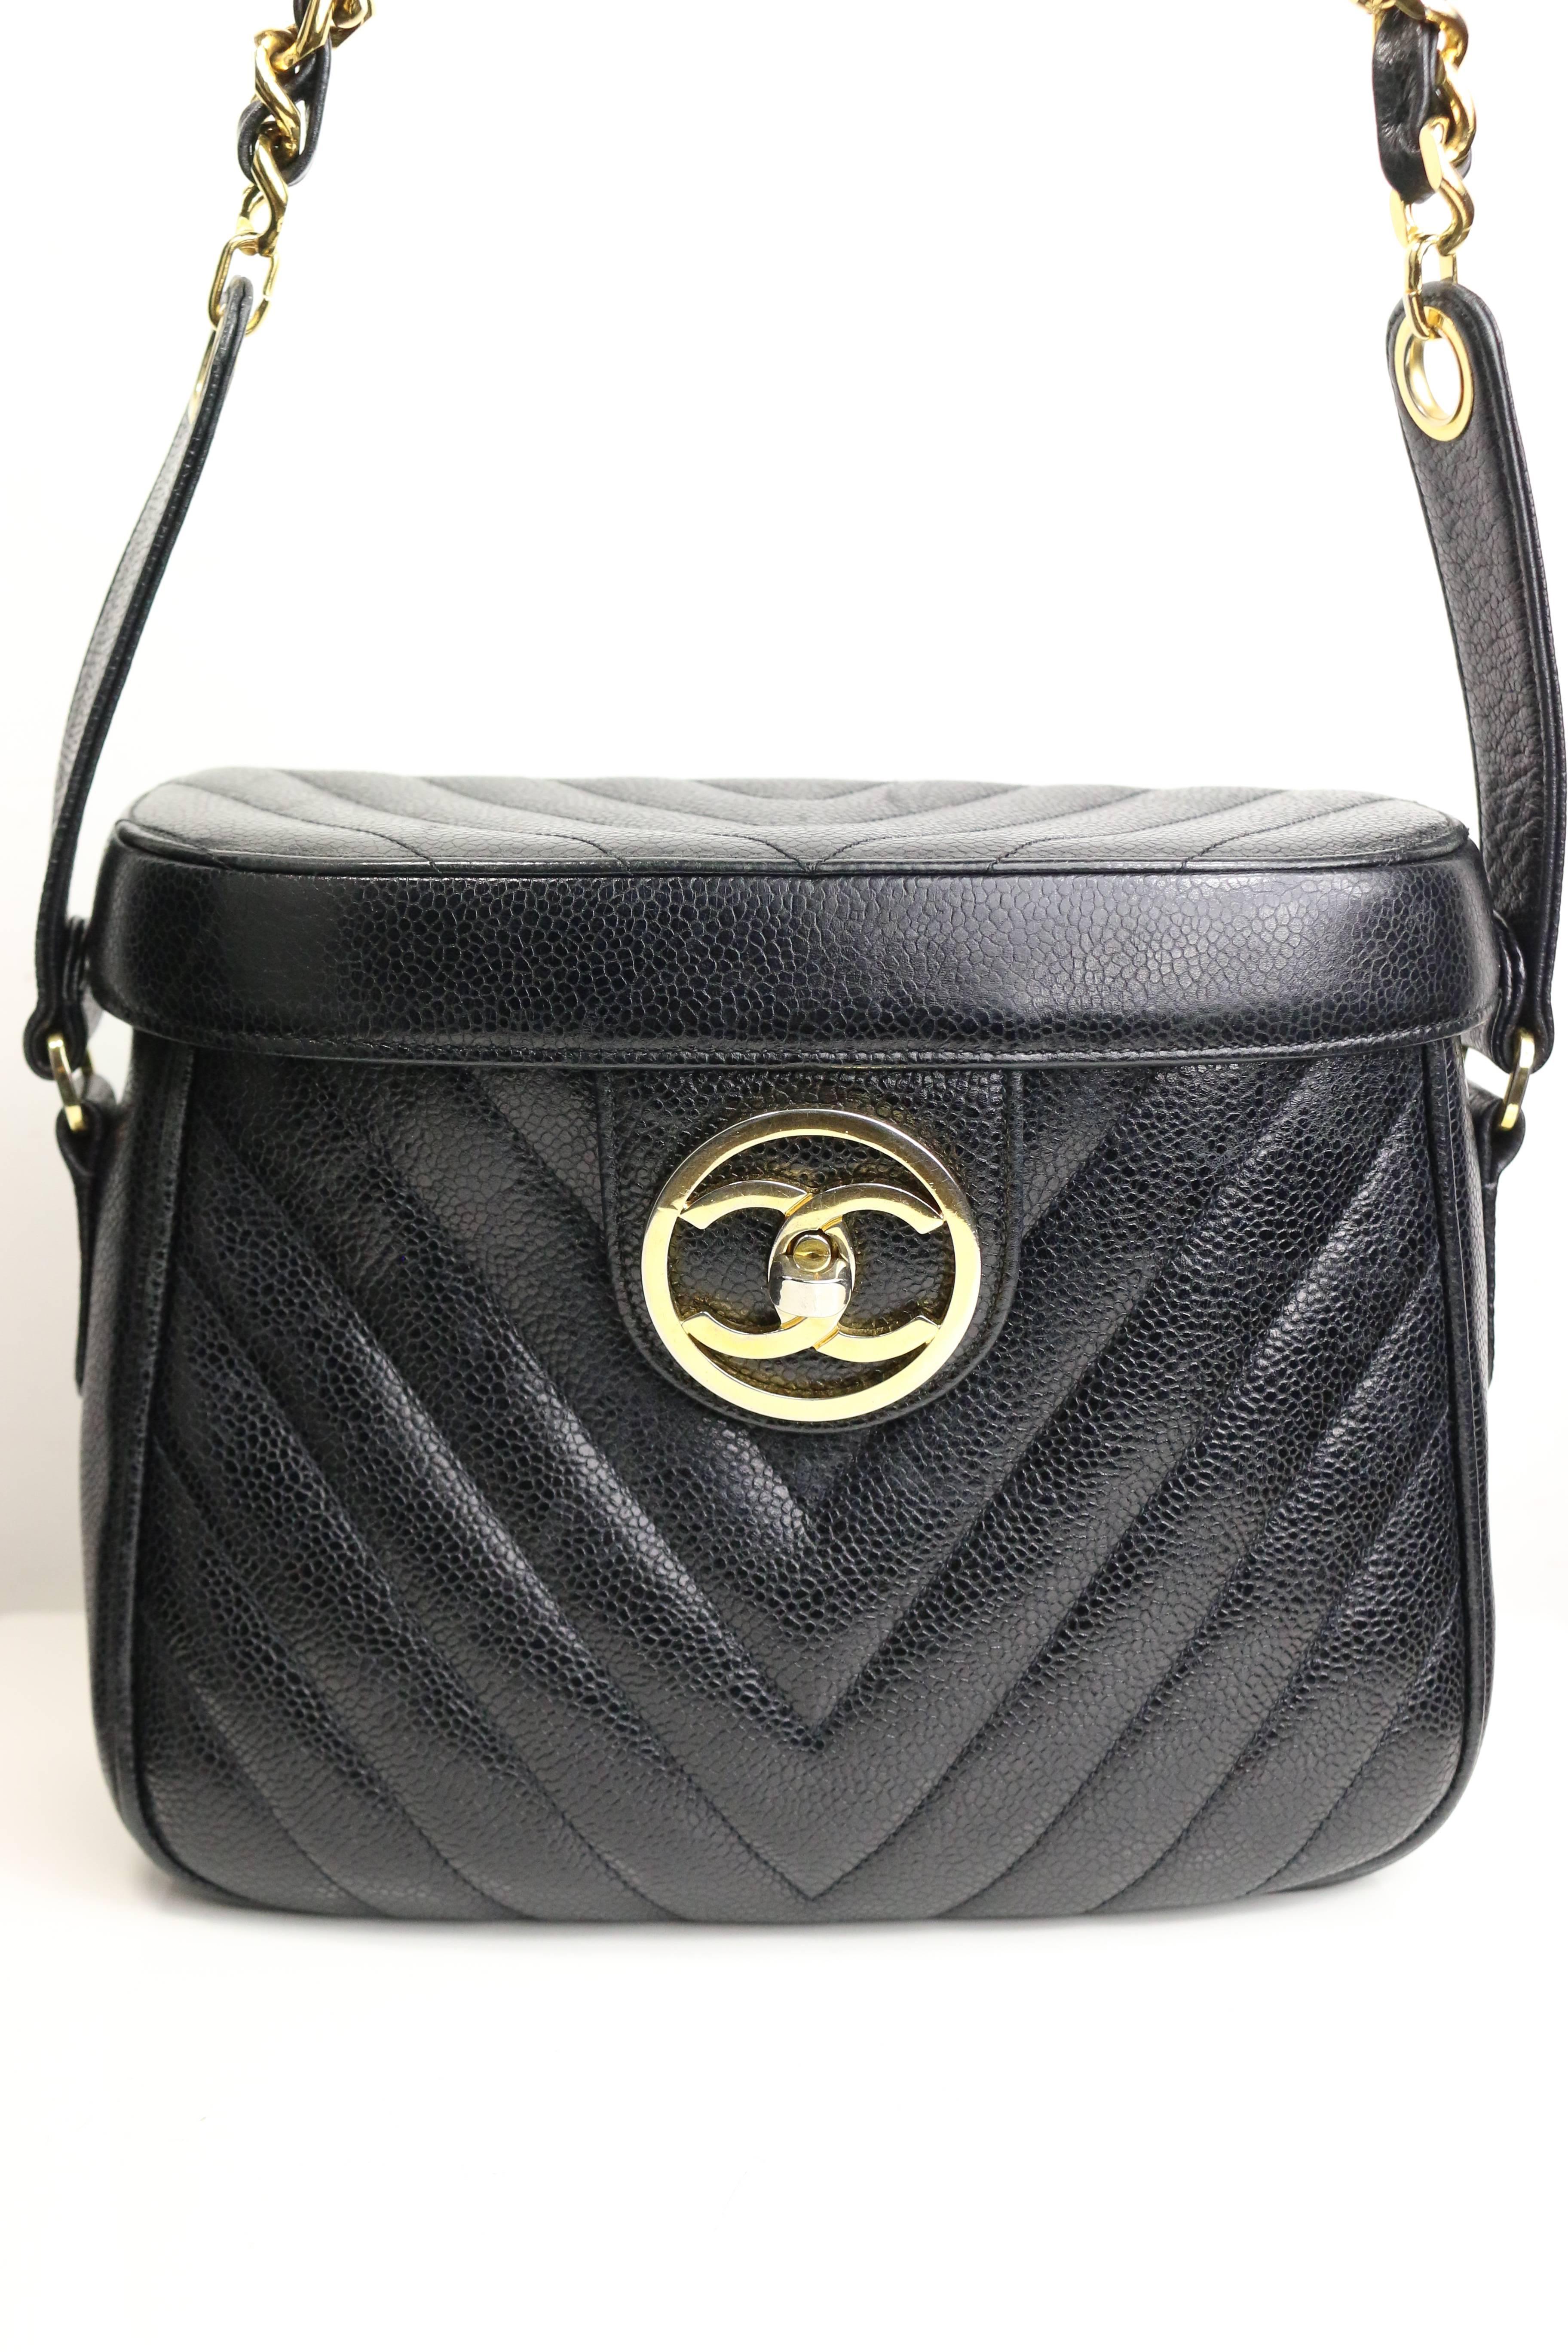 - Vintage 90s Chanel black chevron vanity bag made in caviar leather with gold chain shoulder strap. Featuring a gold "CC" turn lock closure, an interior mirror and zipper pockets. This vintage looking vanity bag goes well with anything.